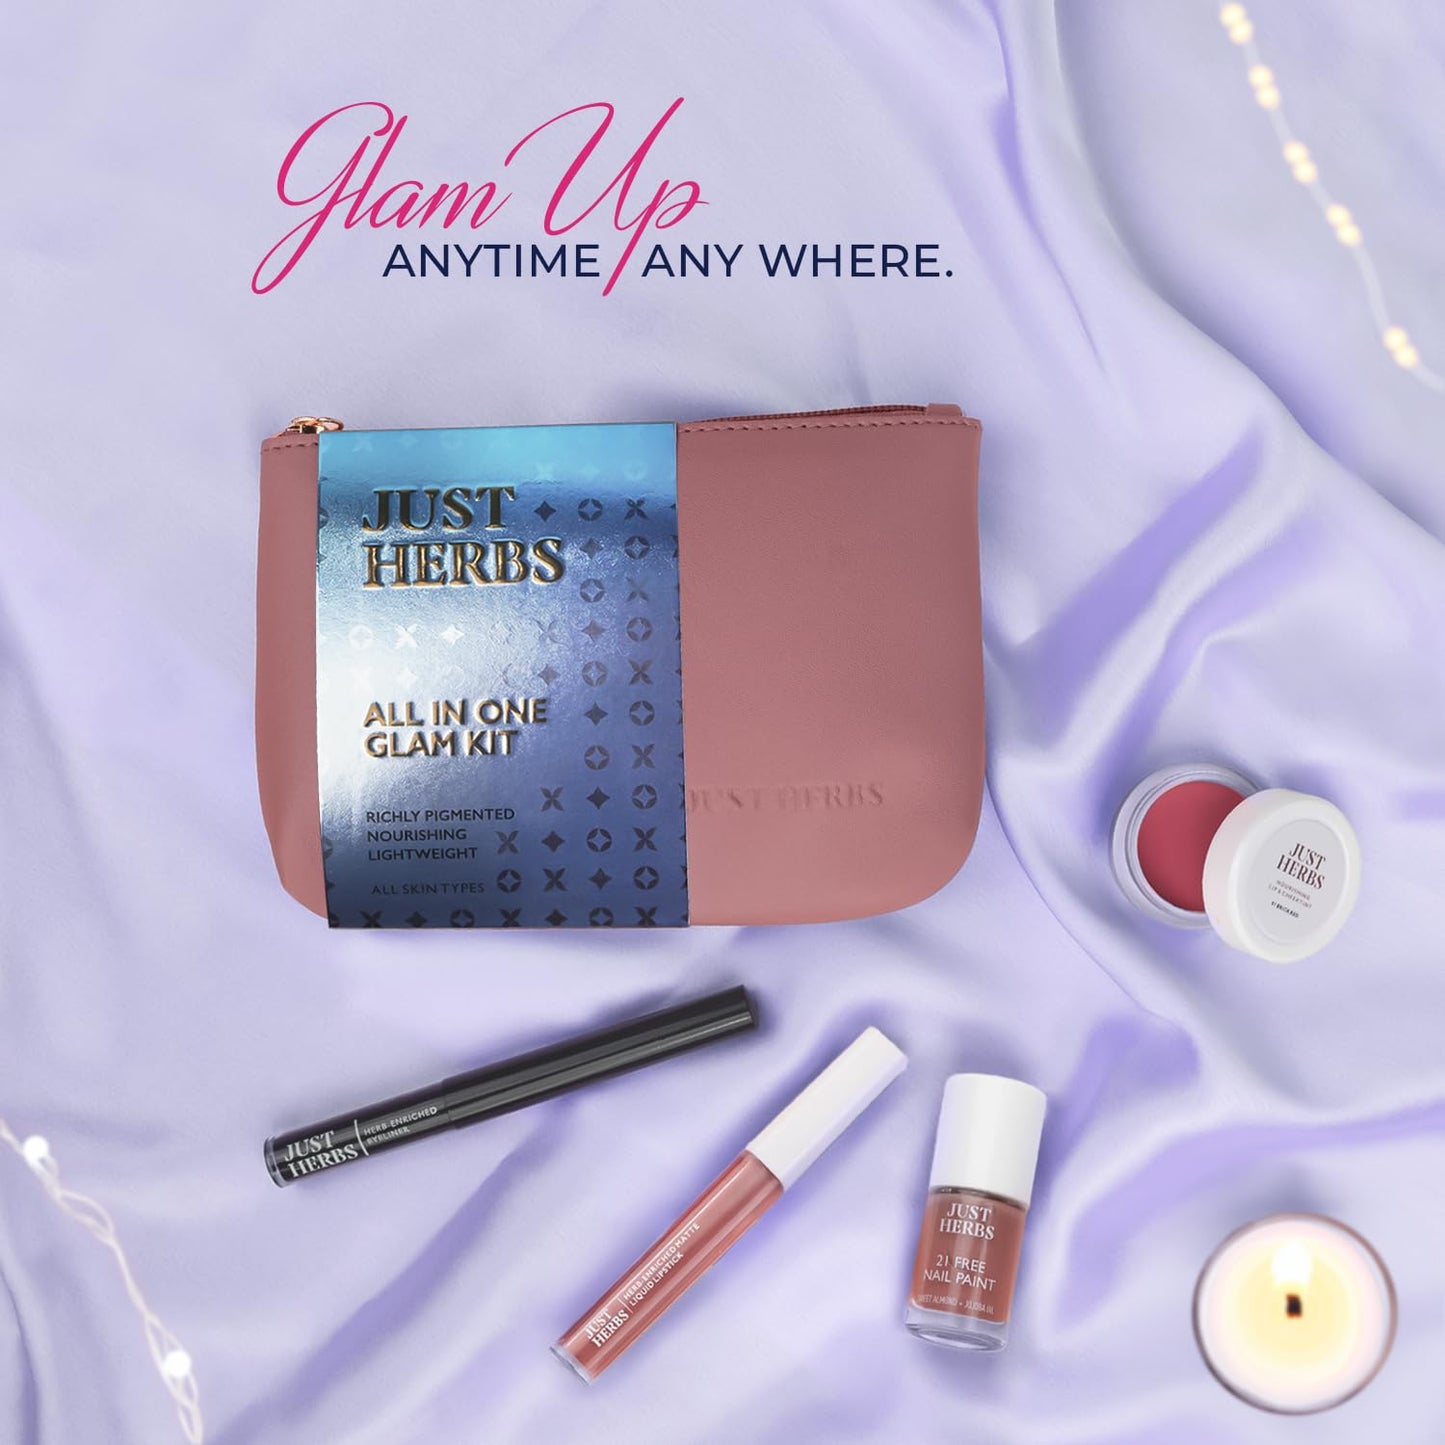 Just Herbs All in 1 Glam Kit Travel Frindly Gifting Pouch for Women (Lip & Cheeck Tint, Liquid Lipstick, Nail Paint, Eyeliner)